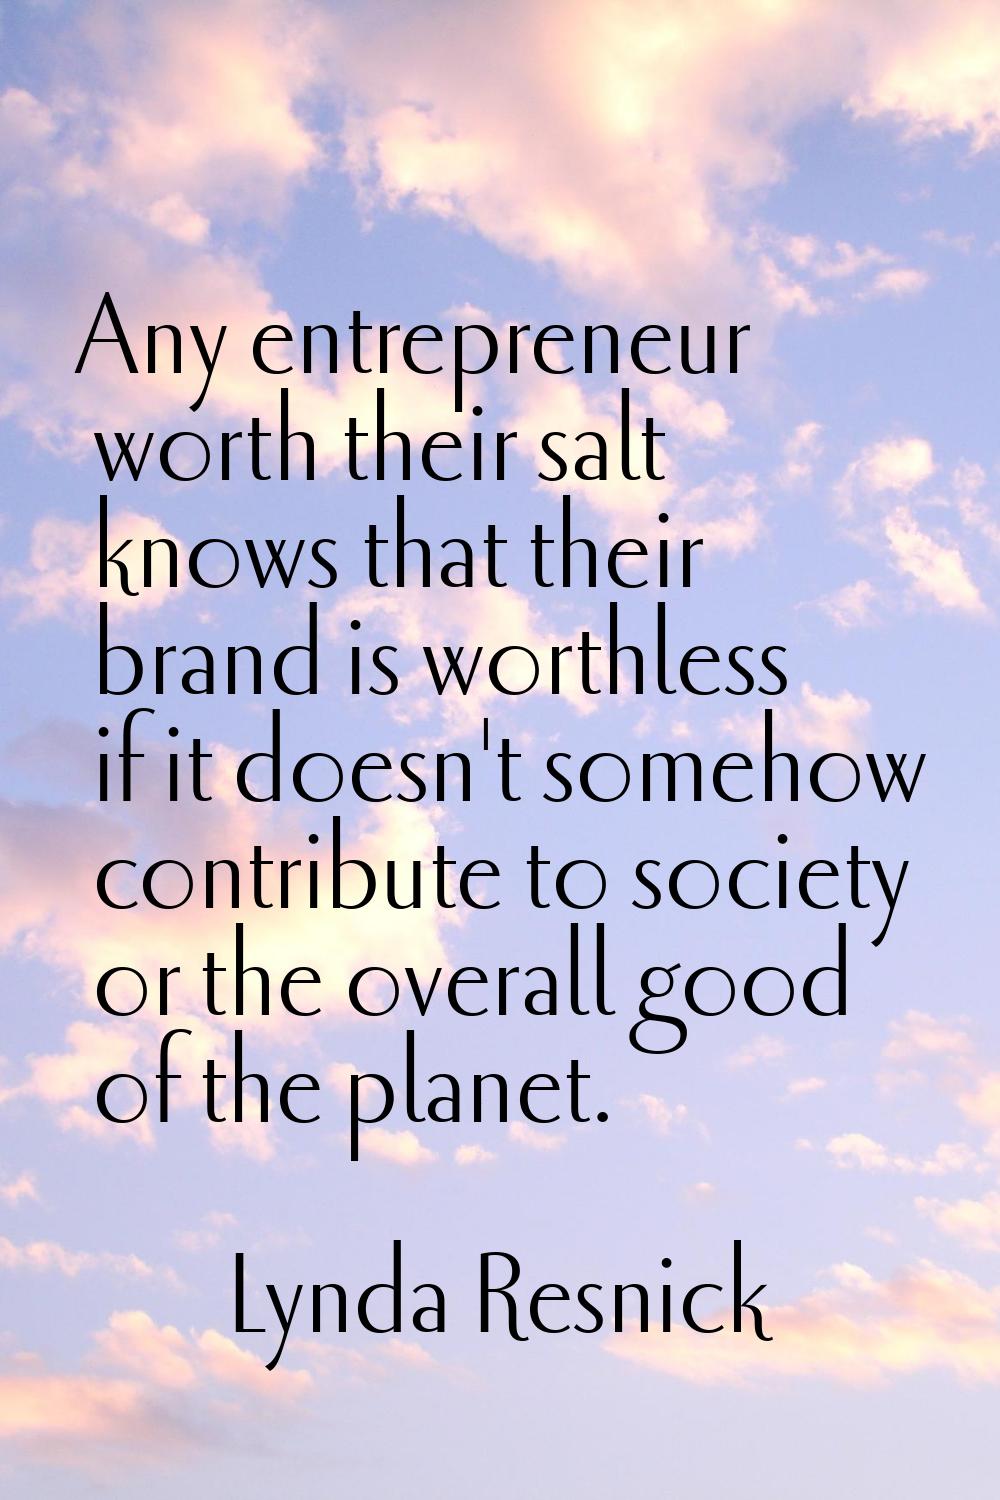 Any entrepreneur worth their salt knows that their brand is worthless if it doesn't somehow contrib